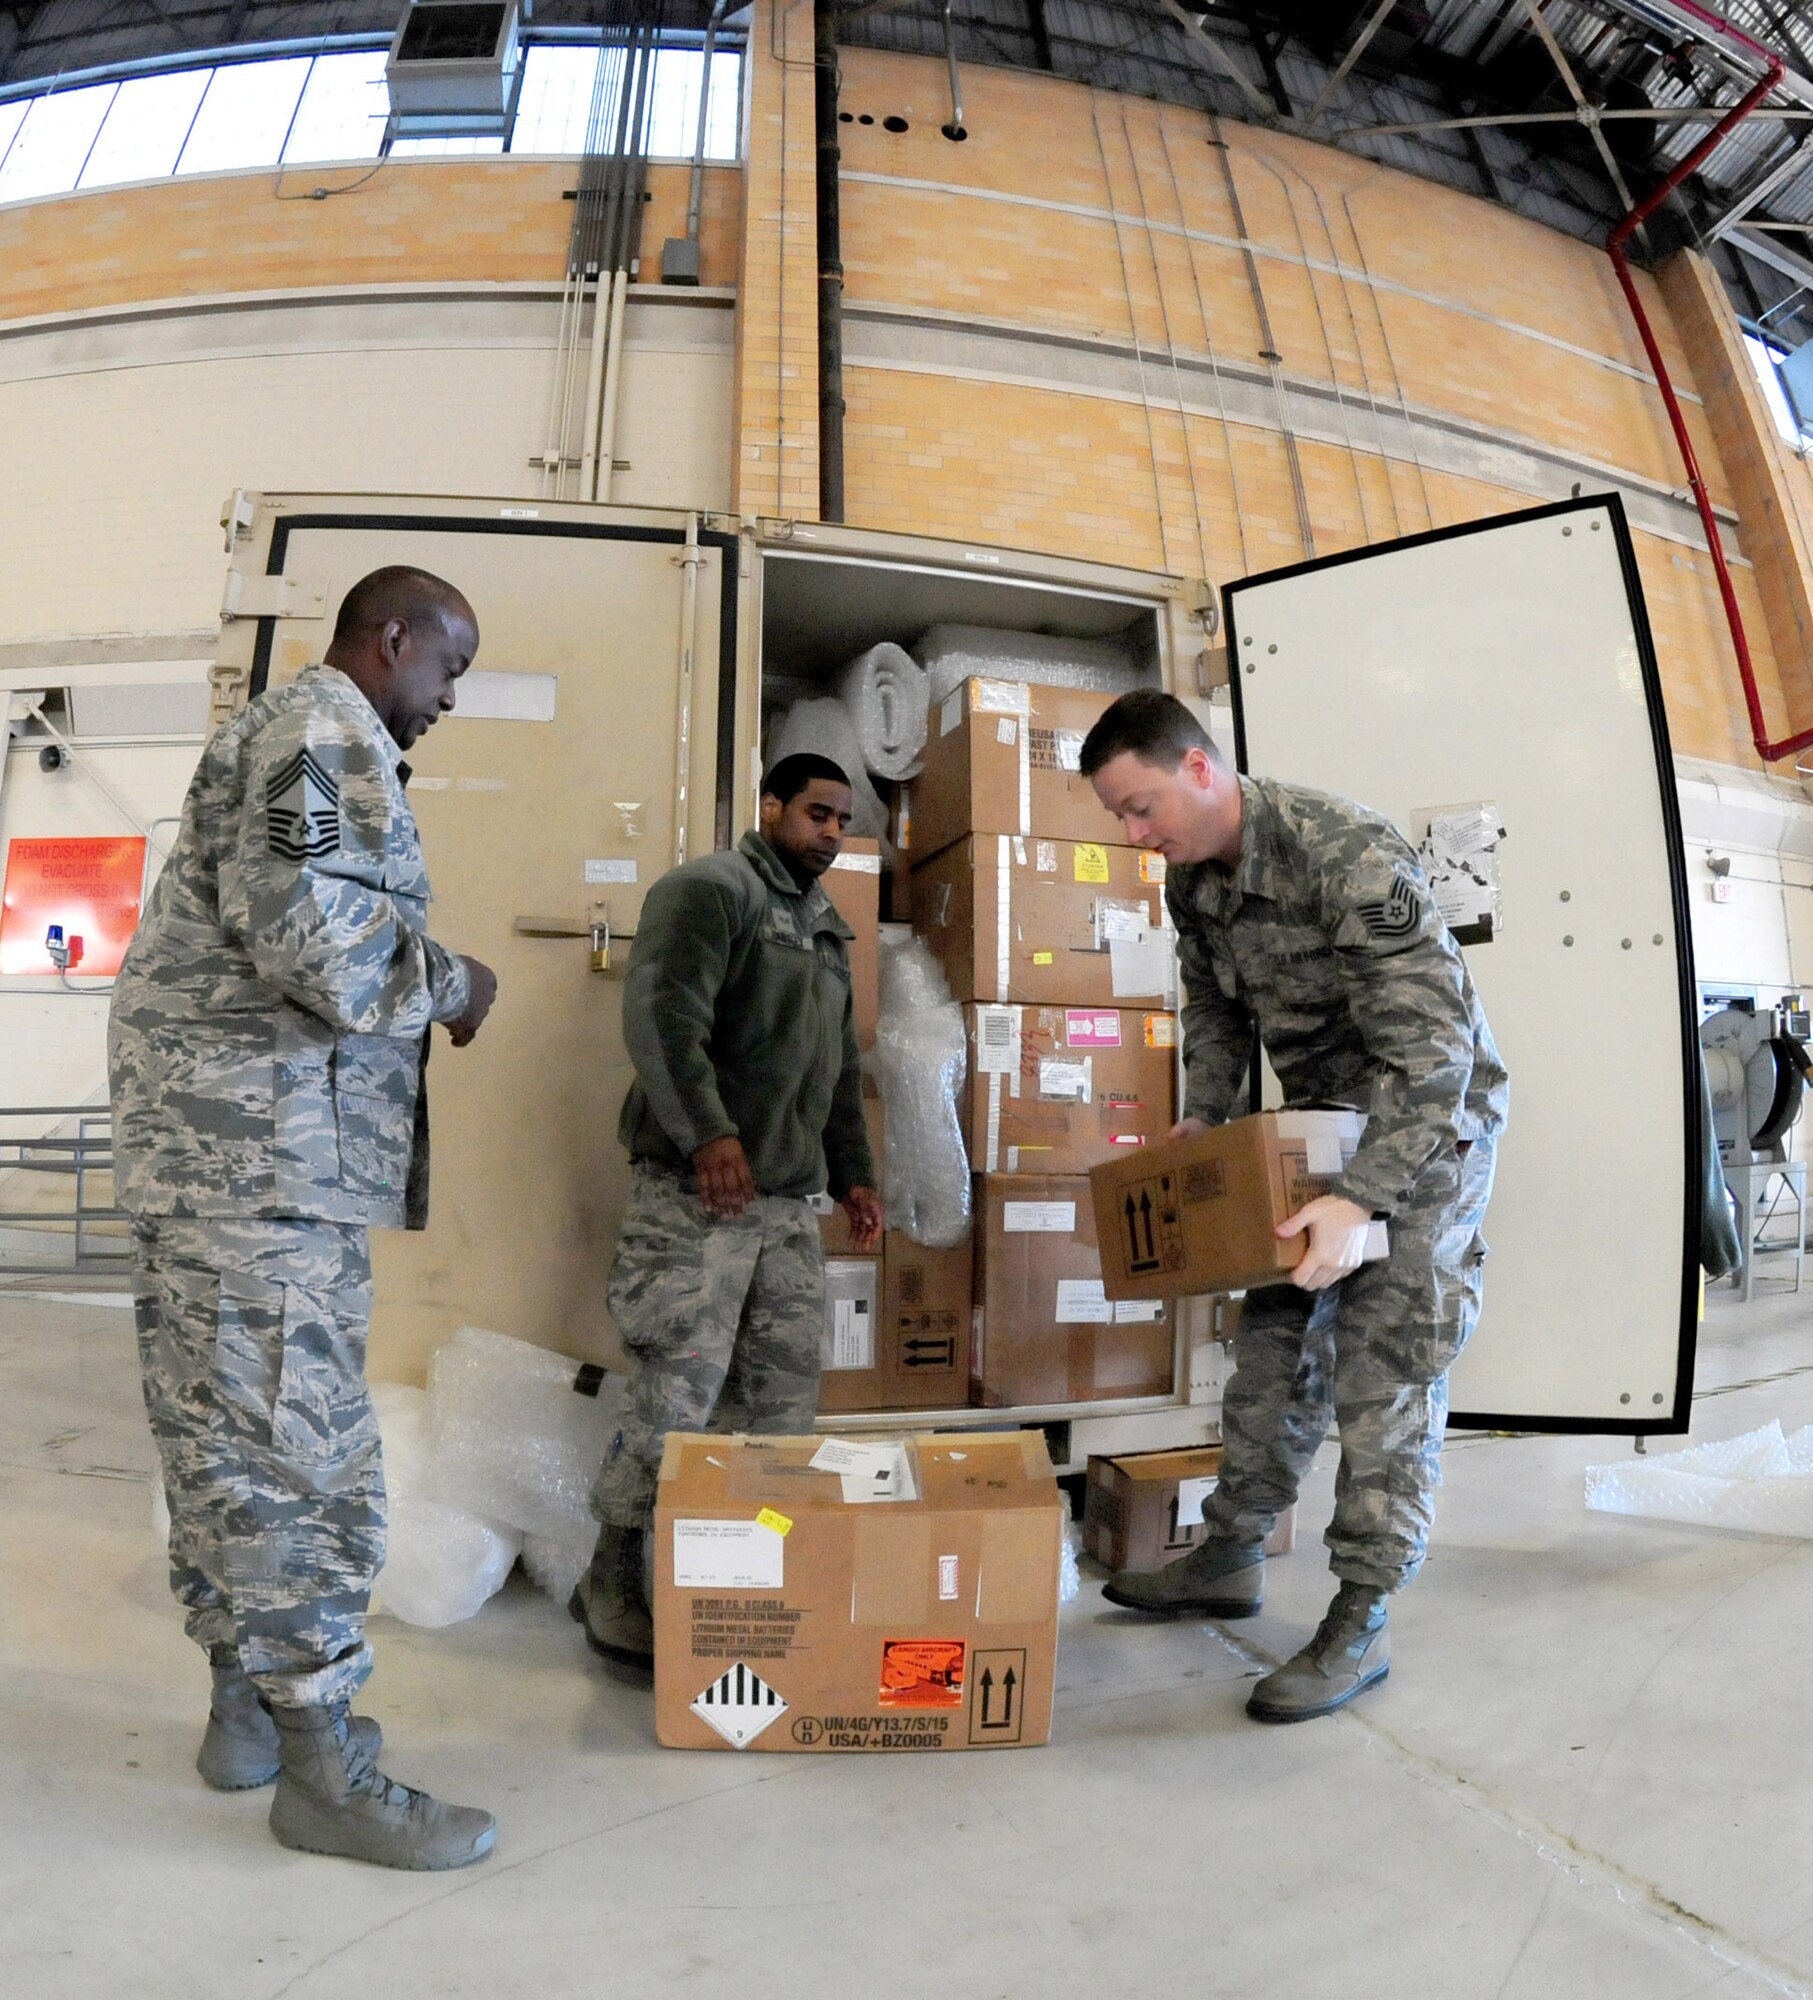 Chief Master Sgt. Darryl White, Senior Airman Marcus Hartley, and Tech. Sgt. Erin Yates, all from the 113th Logistics Readiness Squadron, Joint Base Andrews, Md., perform an inventory check at Naval Air Station Joint Reserve Base New Orleans, La., while deployed in support of Exercise Sentry Voodoo 2016. More than 200 D.C. Air National Guard Airmen are participating in the multiple unit/aircraft exercise. (Air National Guard photo by Master Sgt. Craig Clapper/Released)